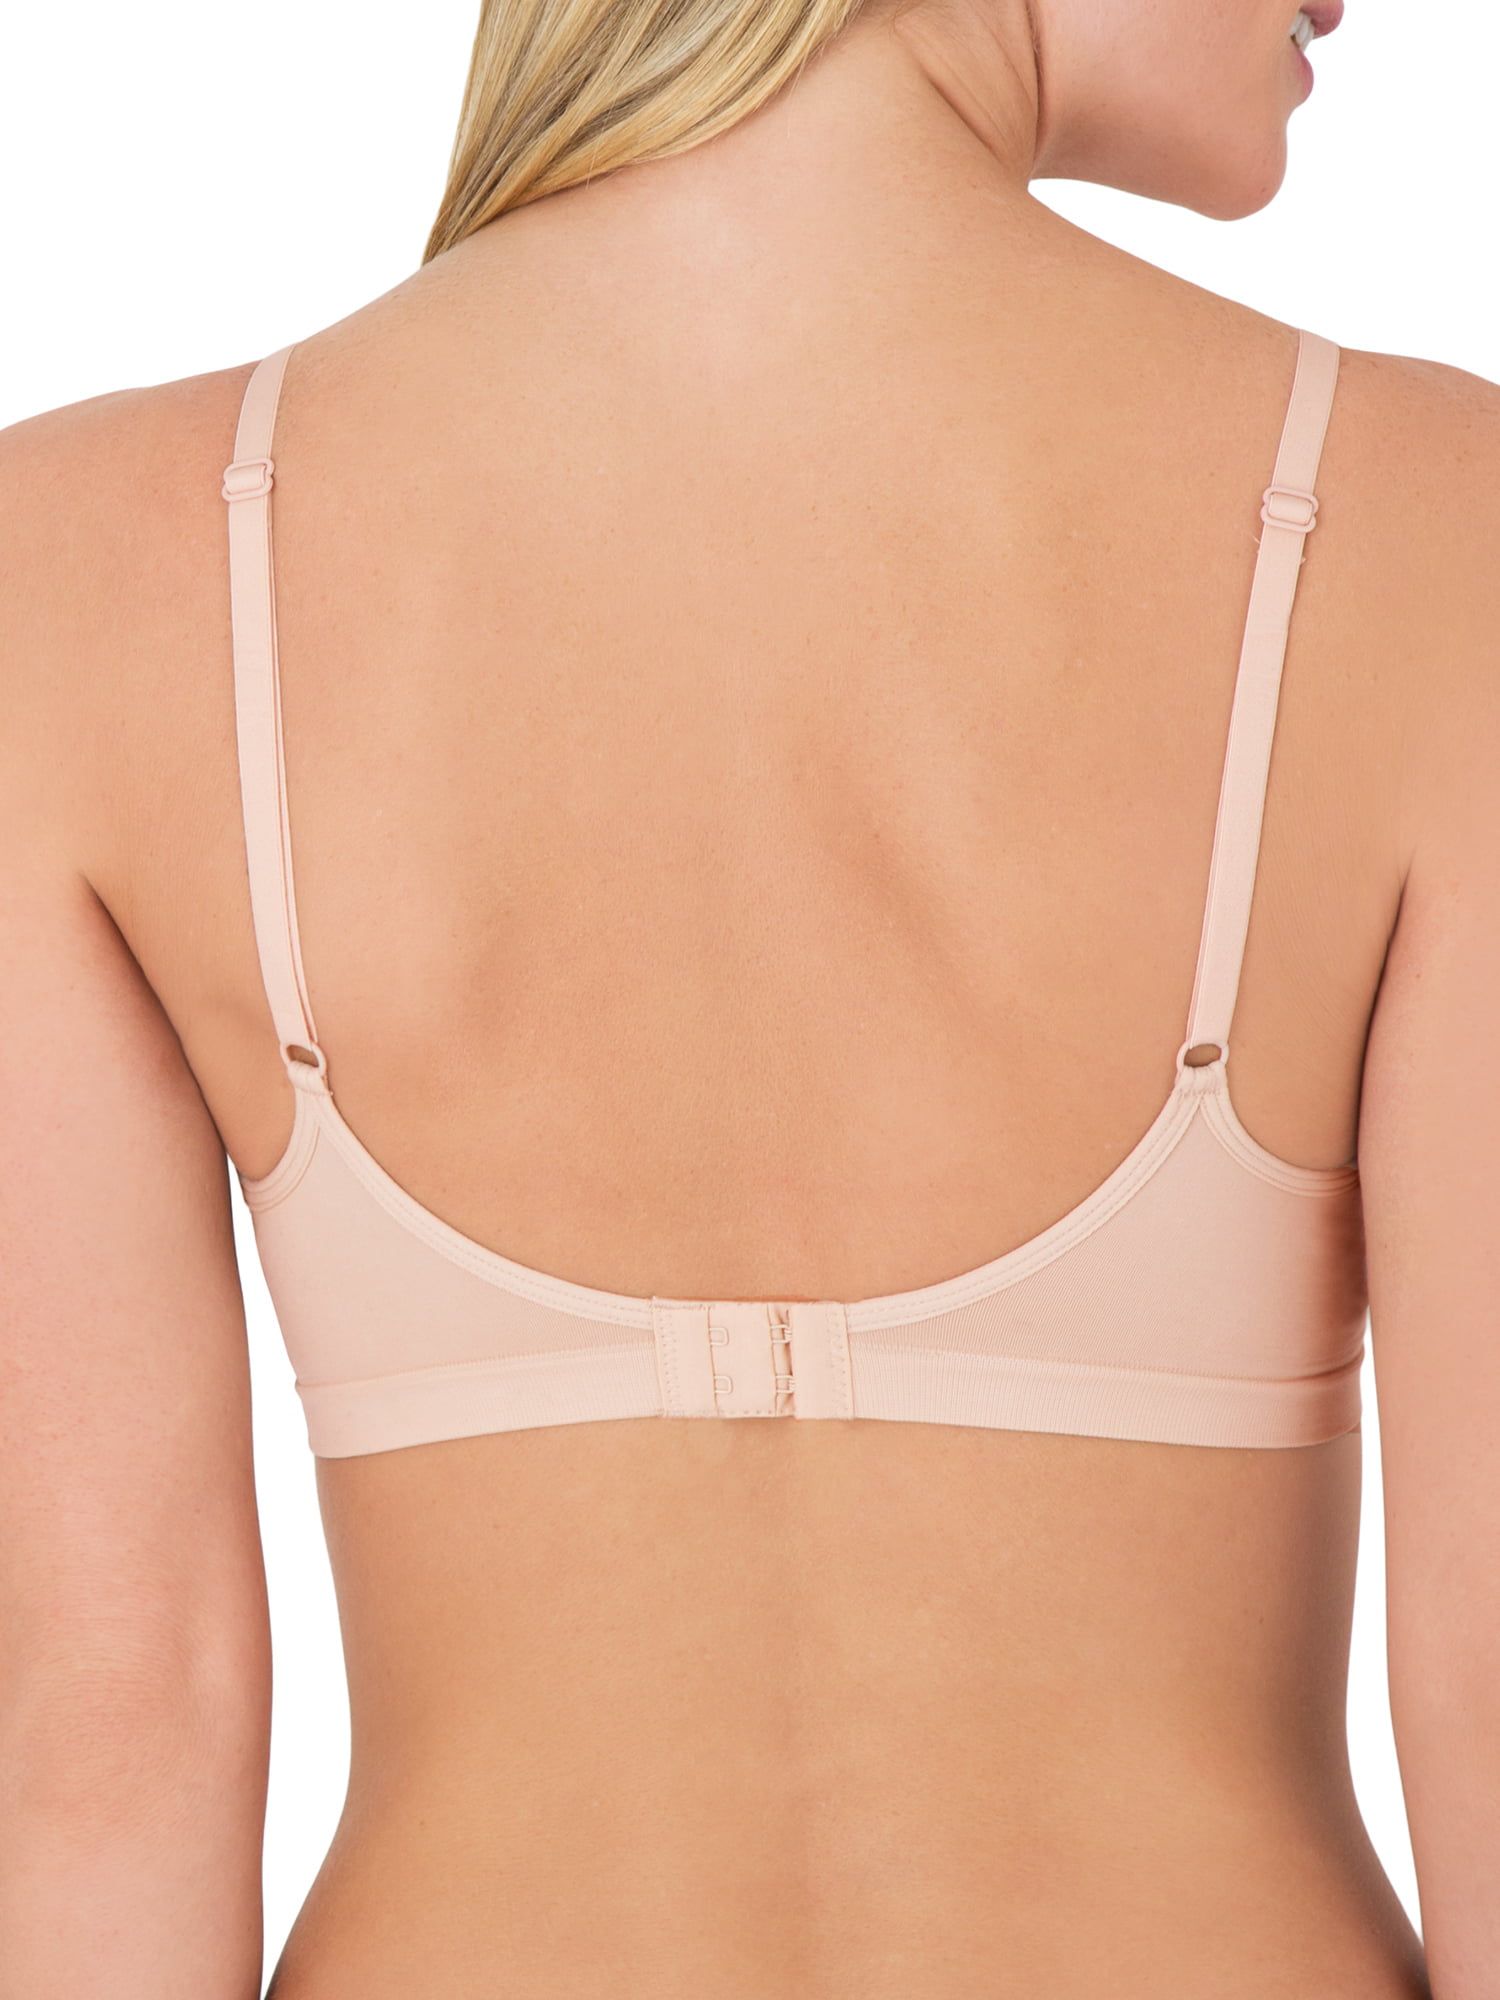 Fruit of the Loom A Fresh Collection Juniors Long Line Bra, Style